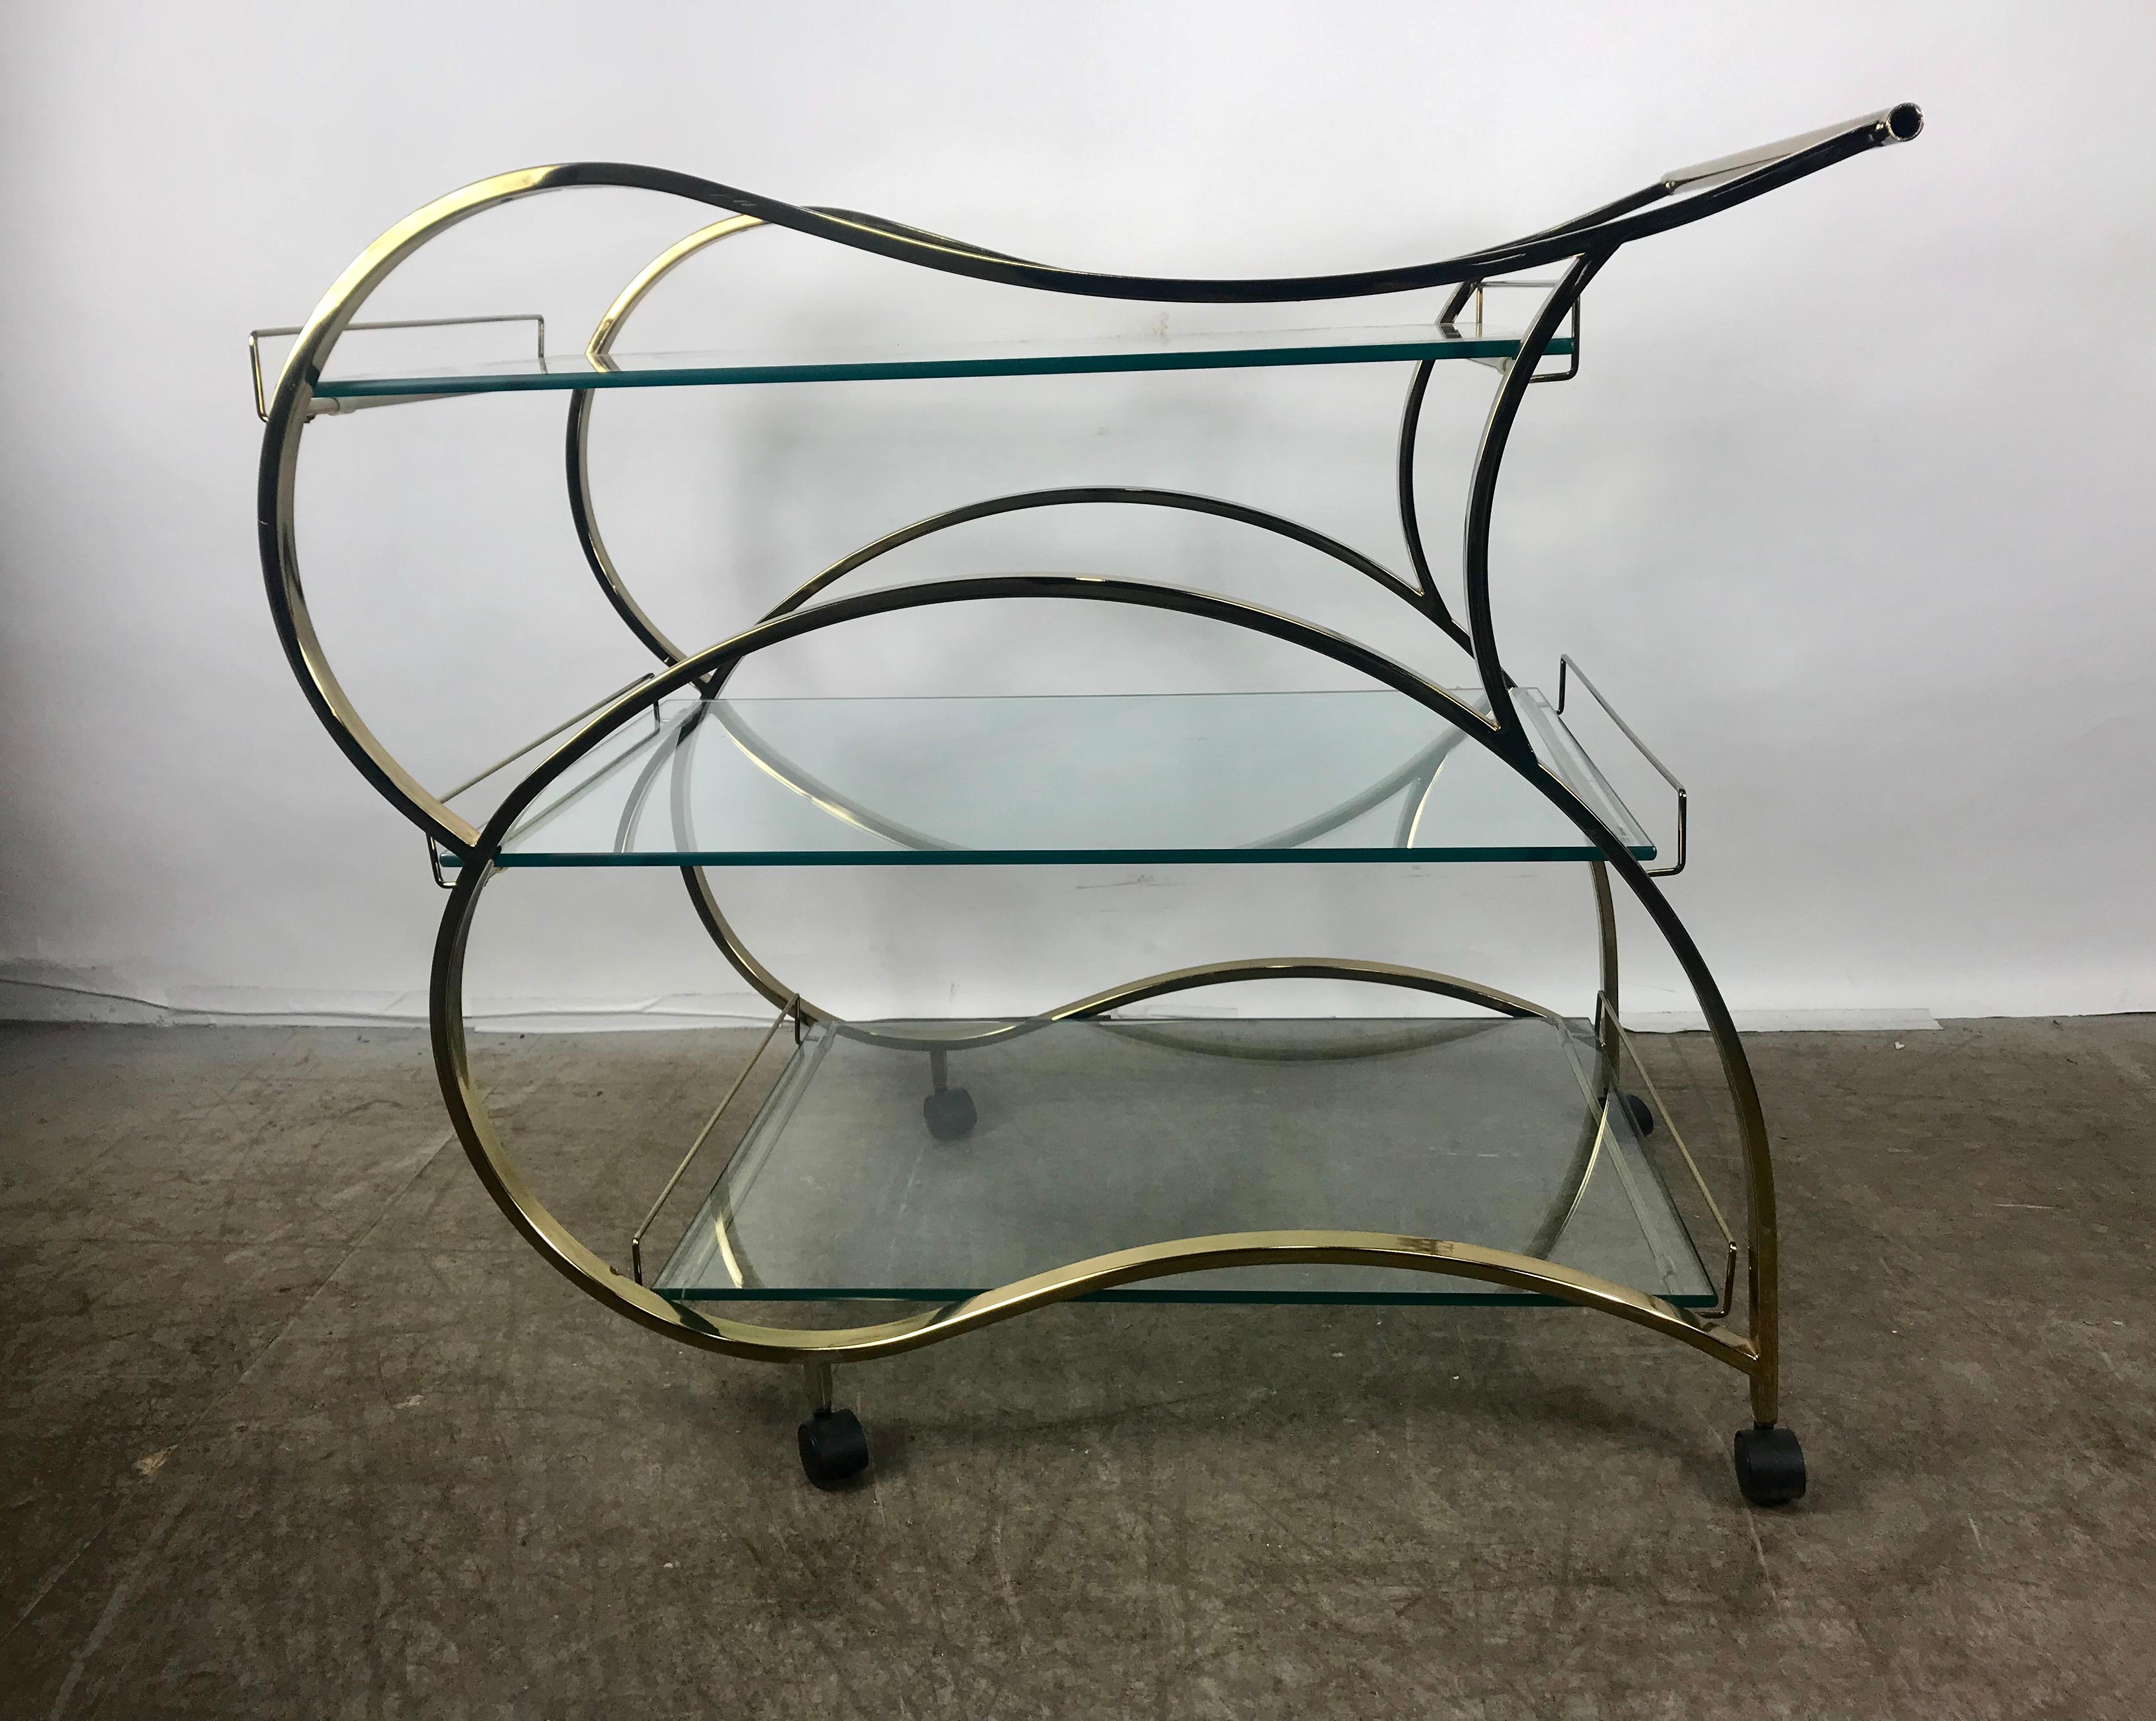 Stunning brass and glass modernist tea or bar cart, trolly seductive lines, streamline design, gleaming brass and 3 half inch glass with polished edges, makes a bold statement Show stopper! Hand delivery avail to New York City or anywhere en route